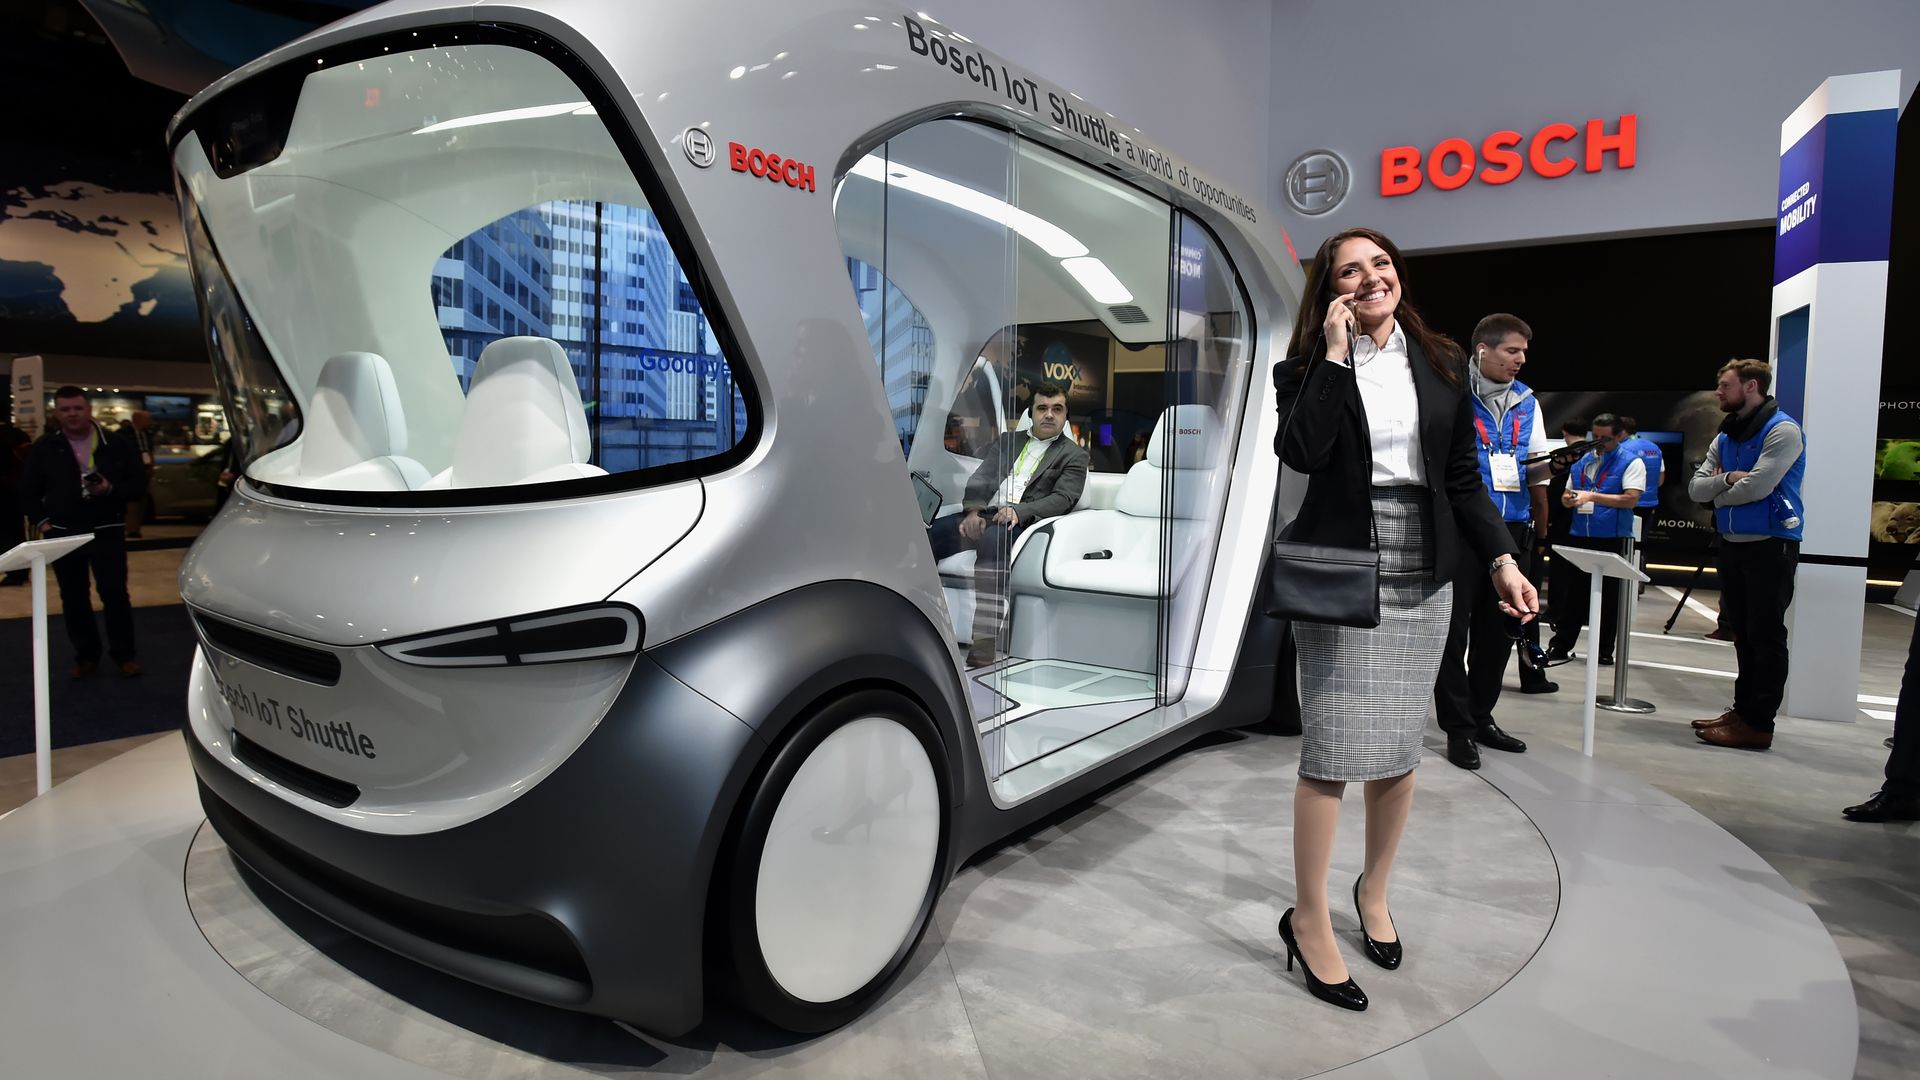 A woman stands near a Bosch automatous shuttle on display at CES